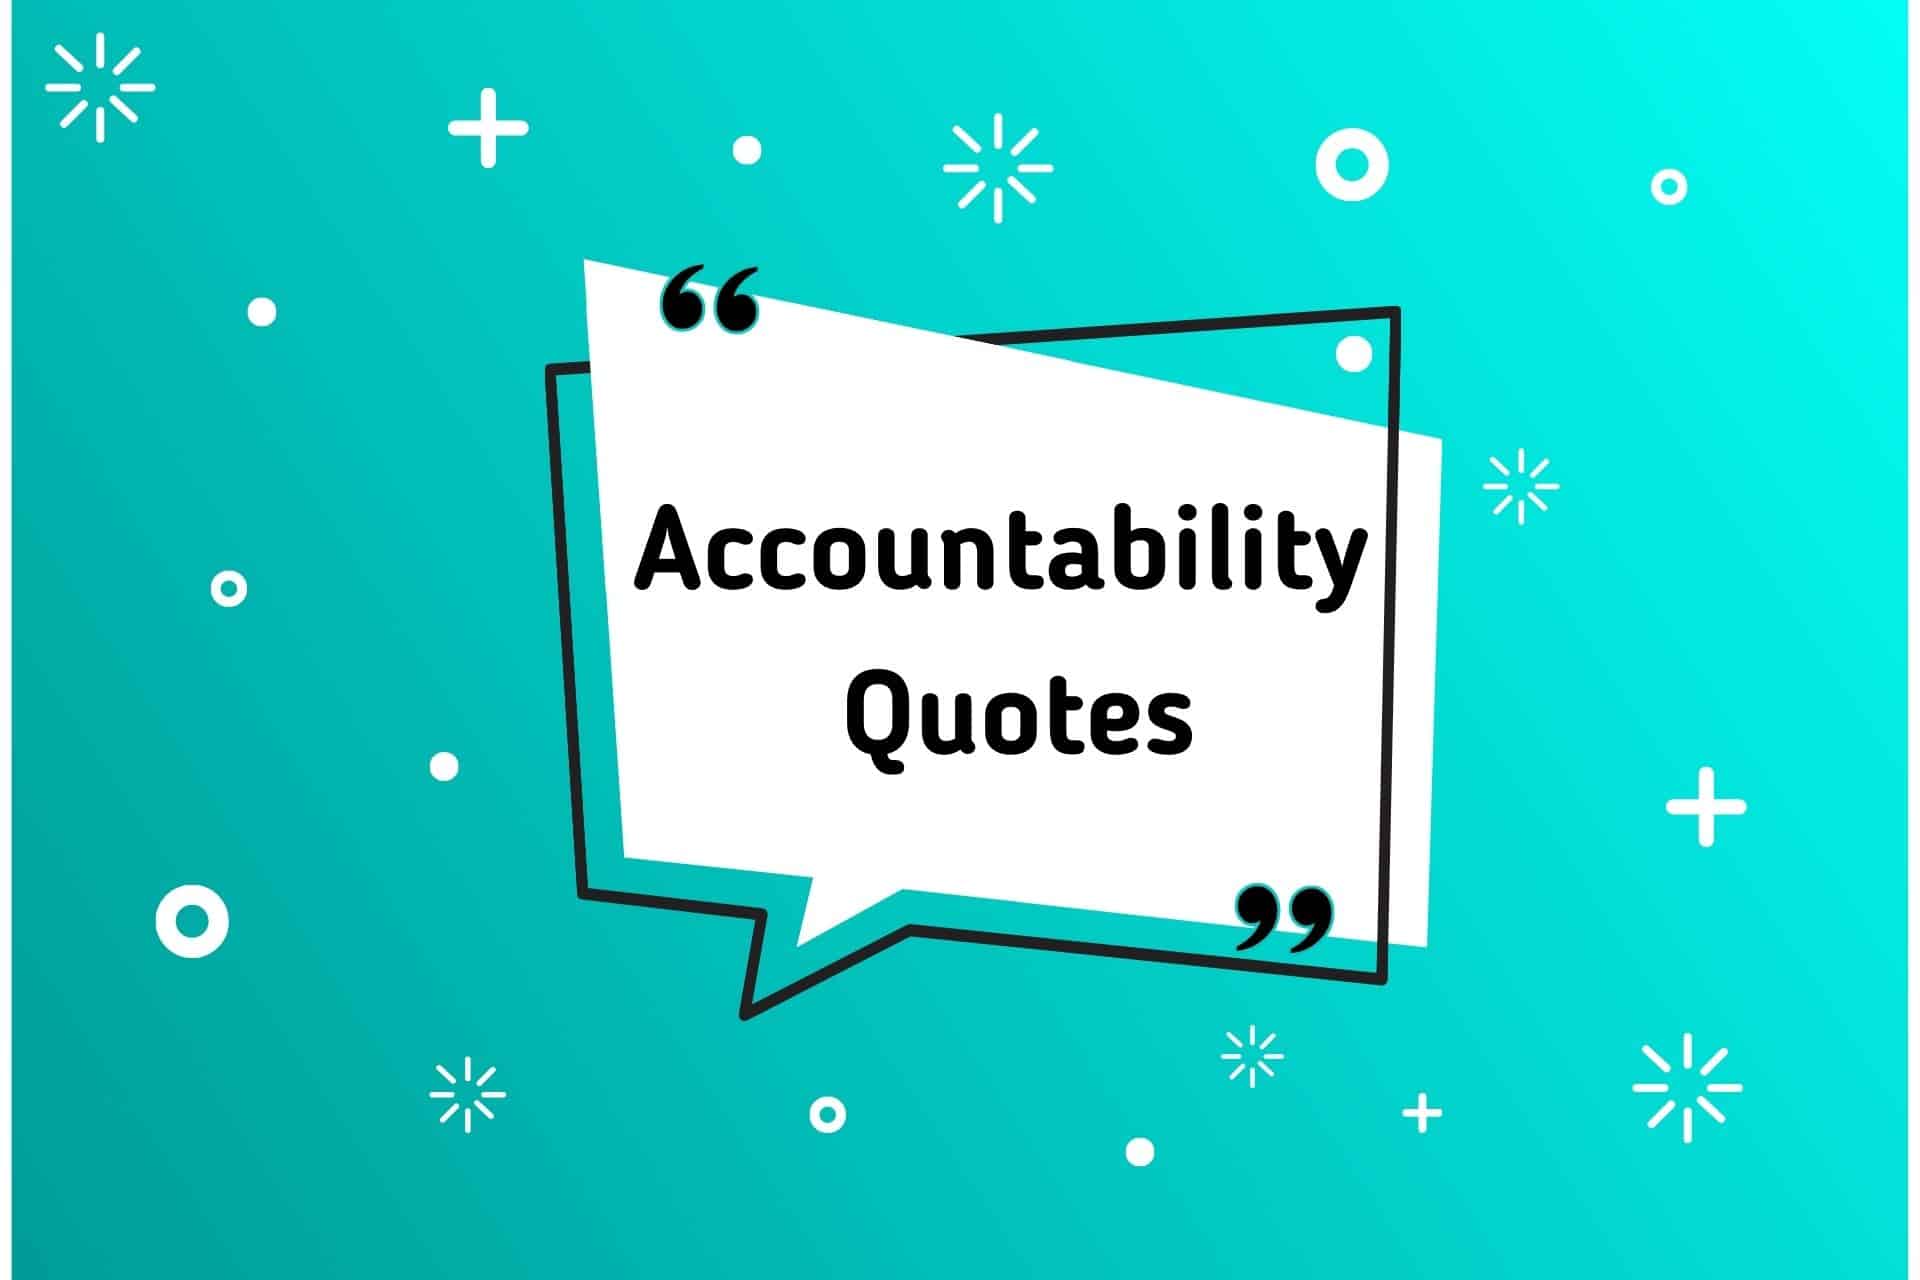 Accountability quotes